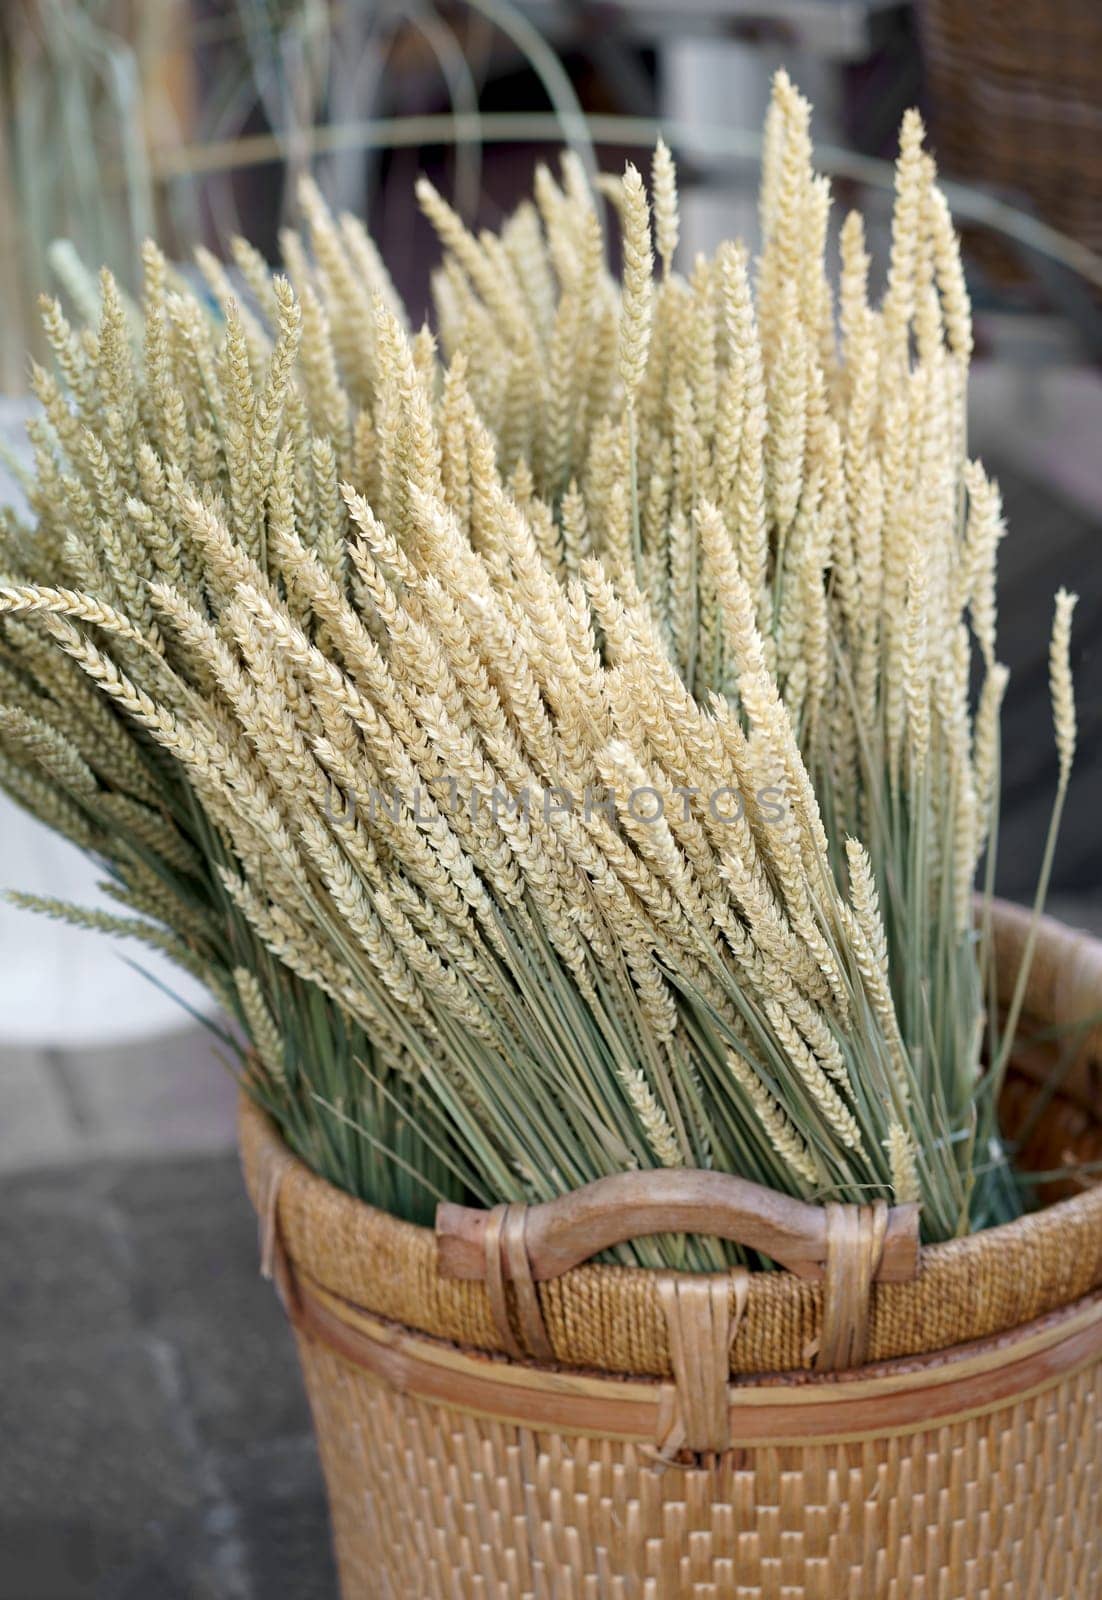 Nice. French market. ears of dry wheat for sale. Full baskets of dry ears of wheat for sale at the florist's shop. by aprilphoto